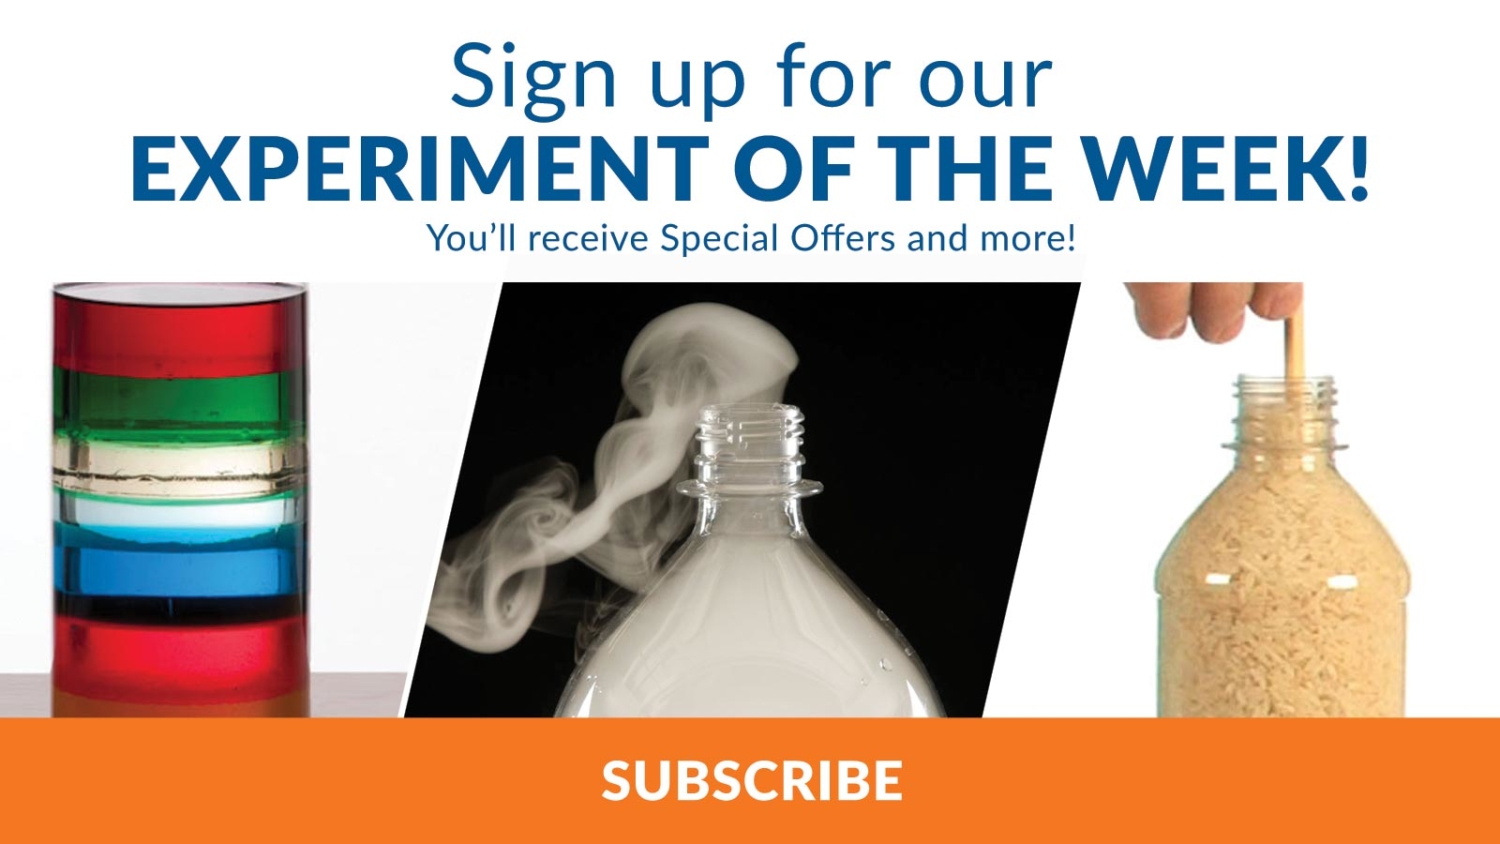 Sign Up for Experiment of the Week